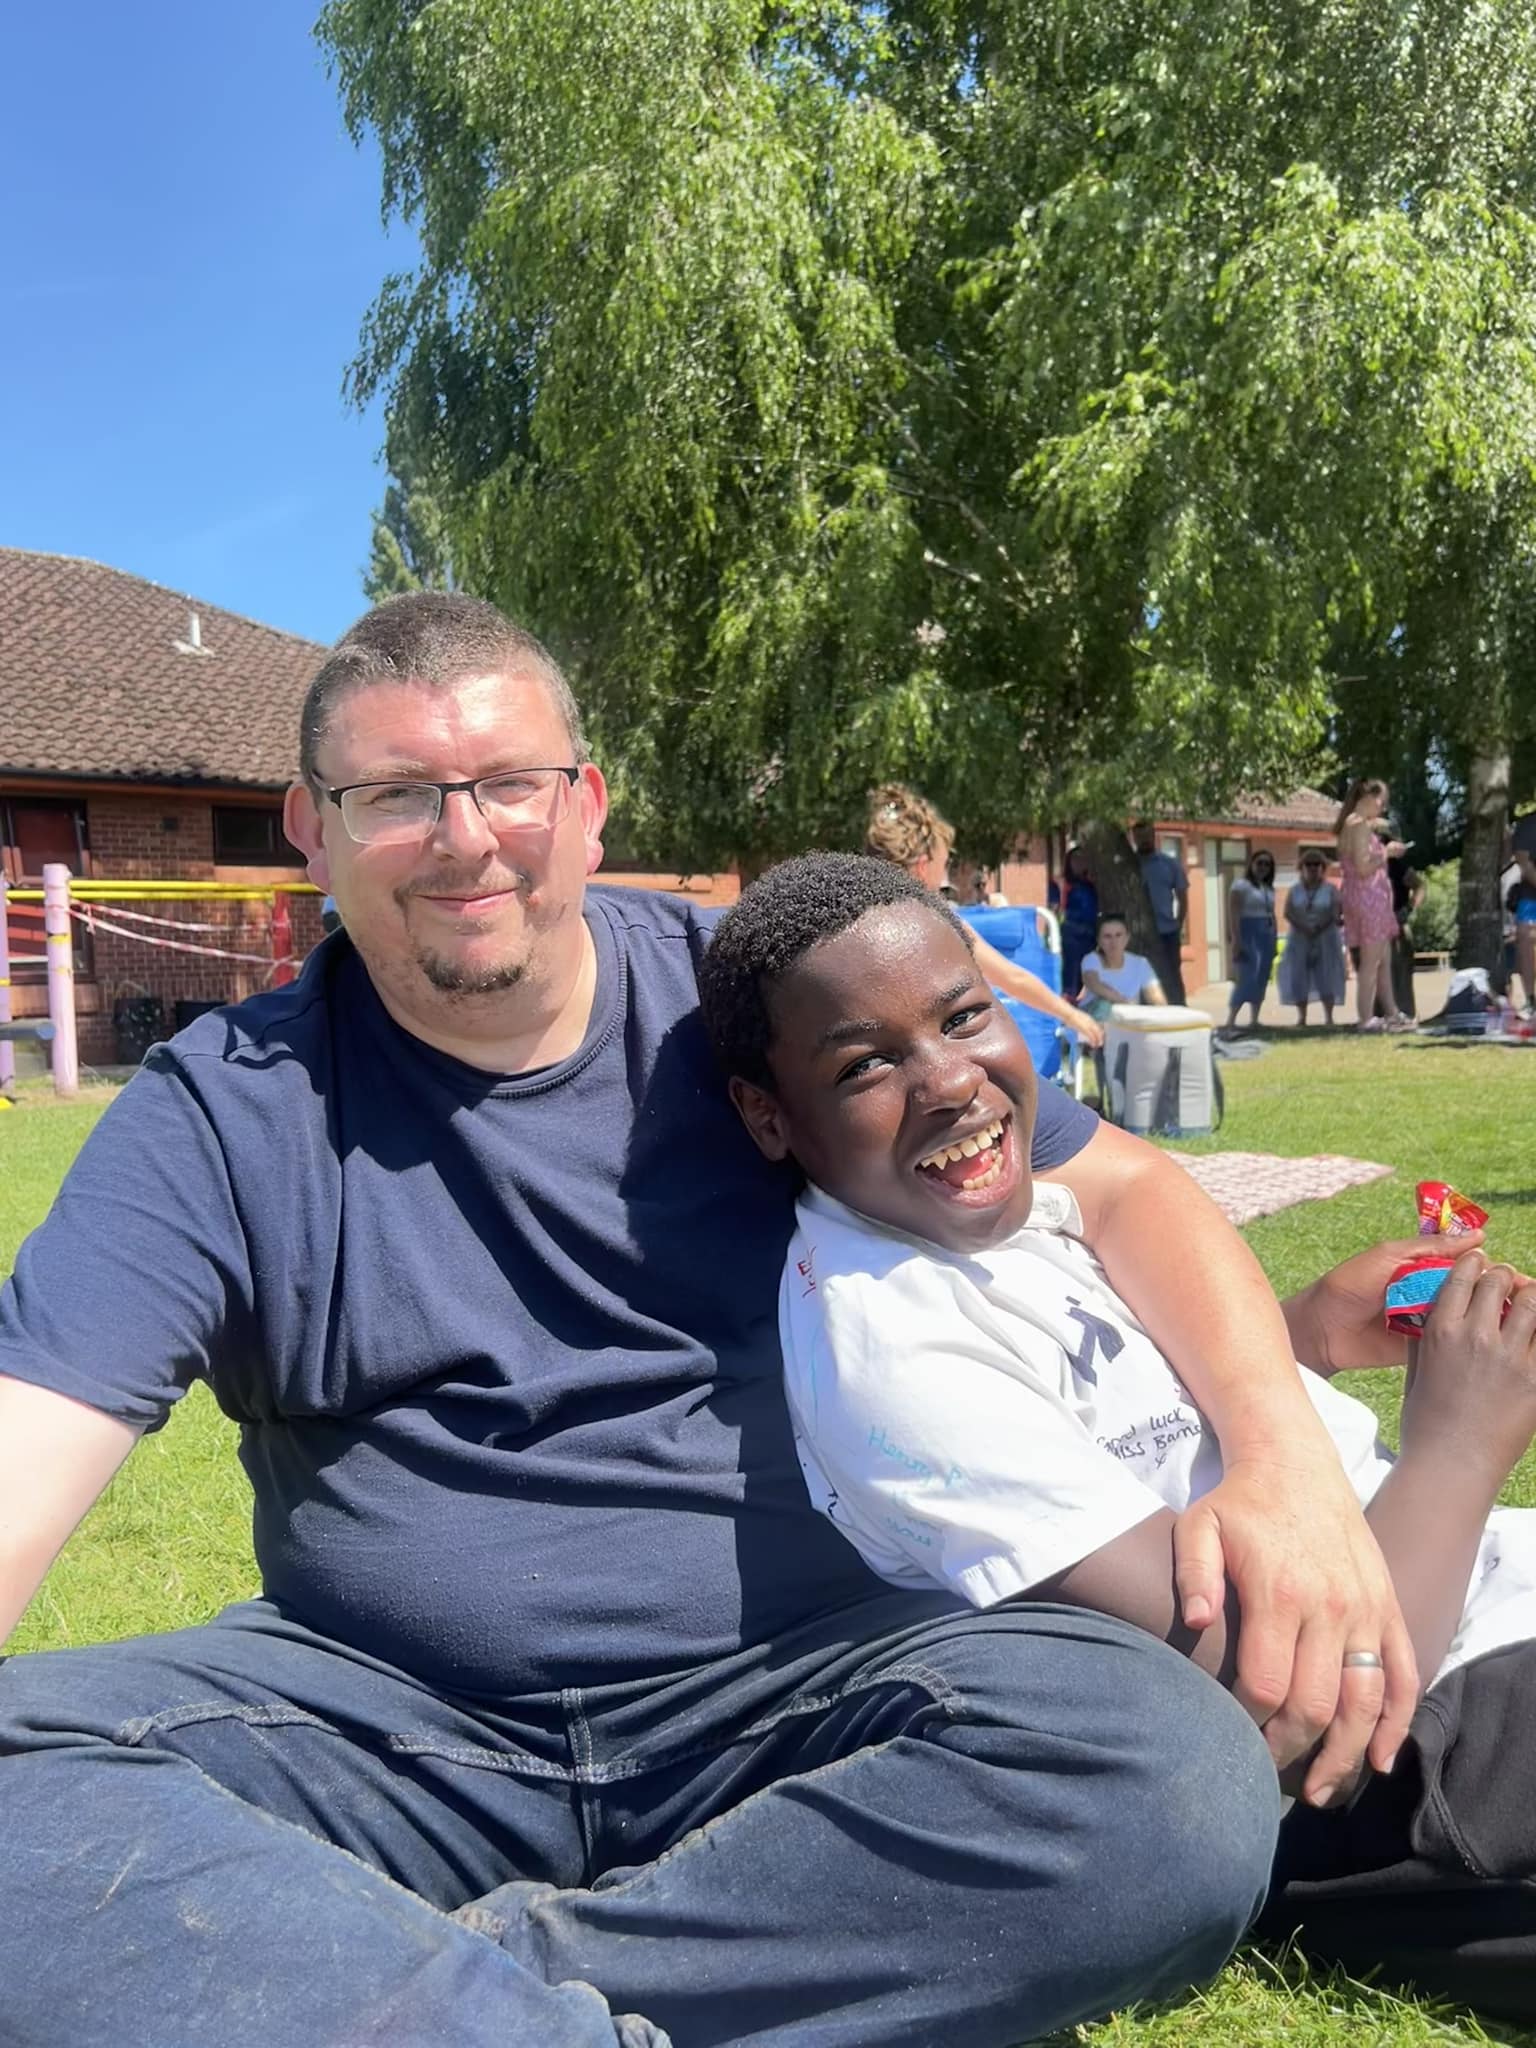 Out in the sun celebrating the big man going up to big school.